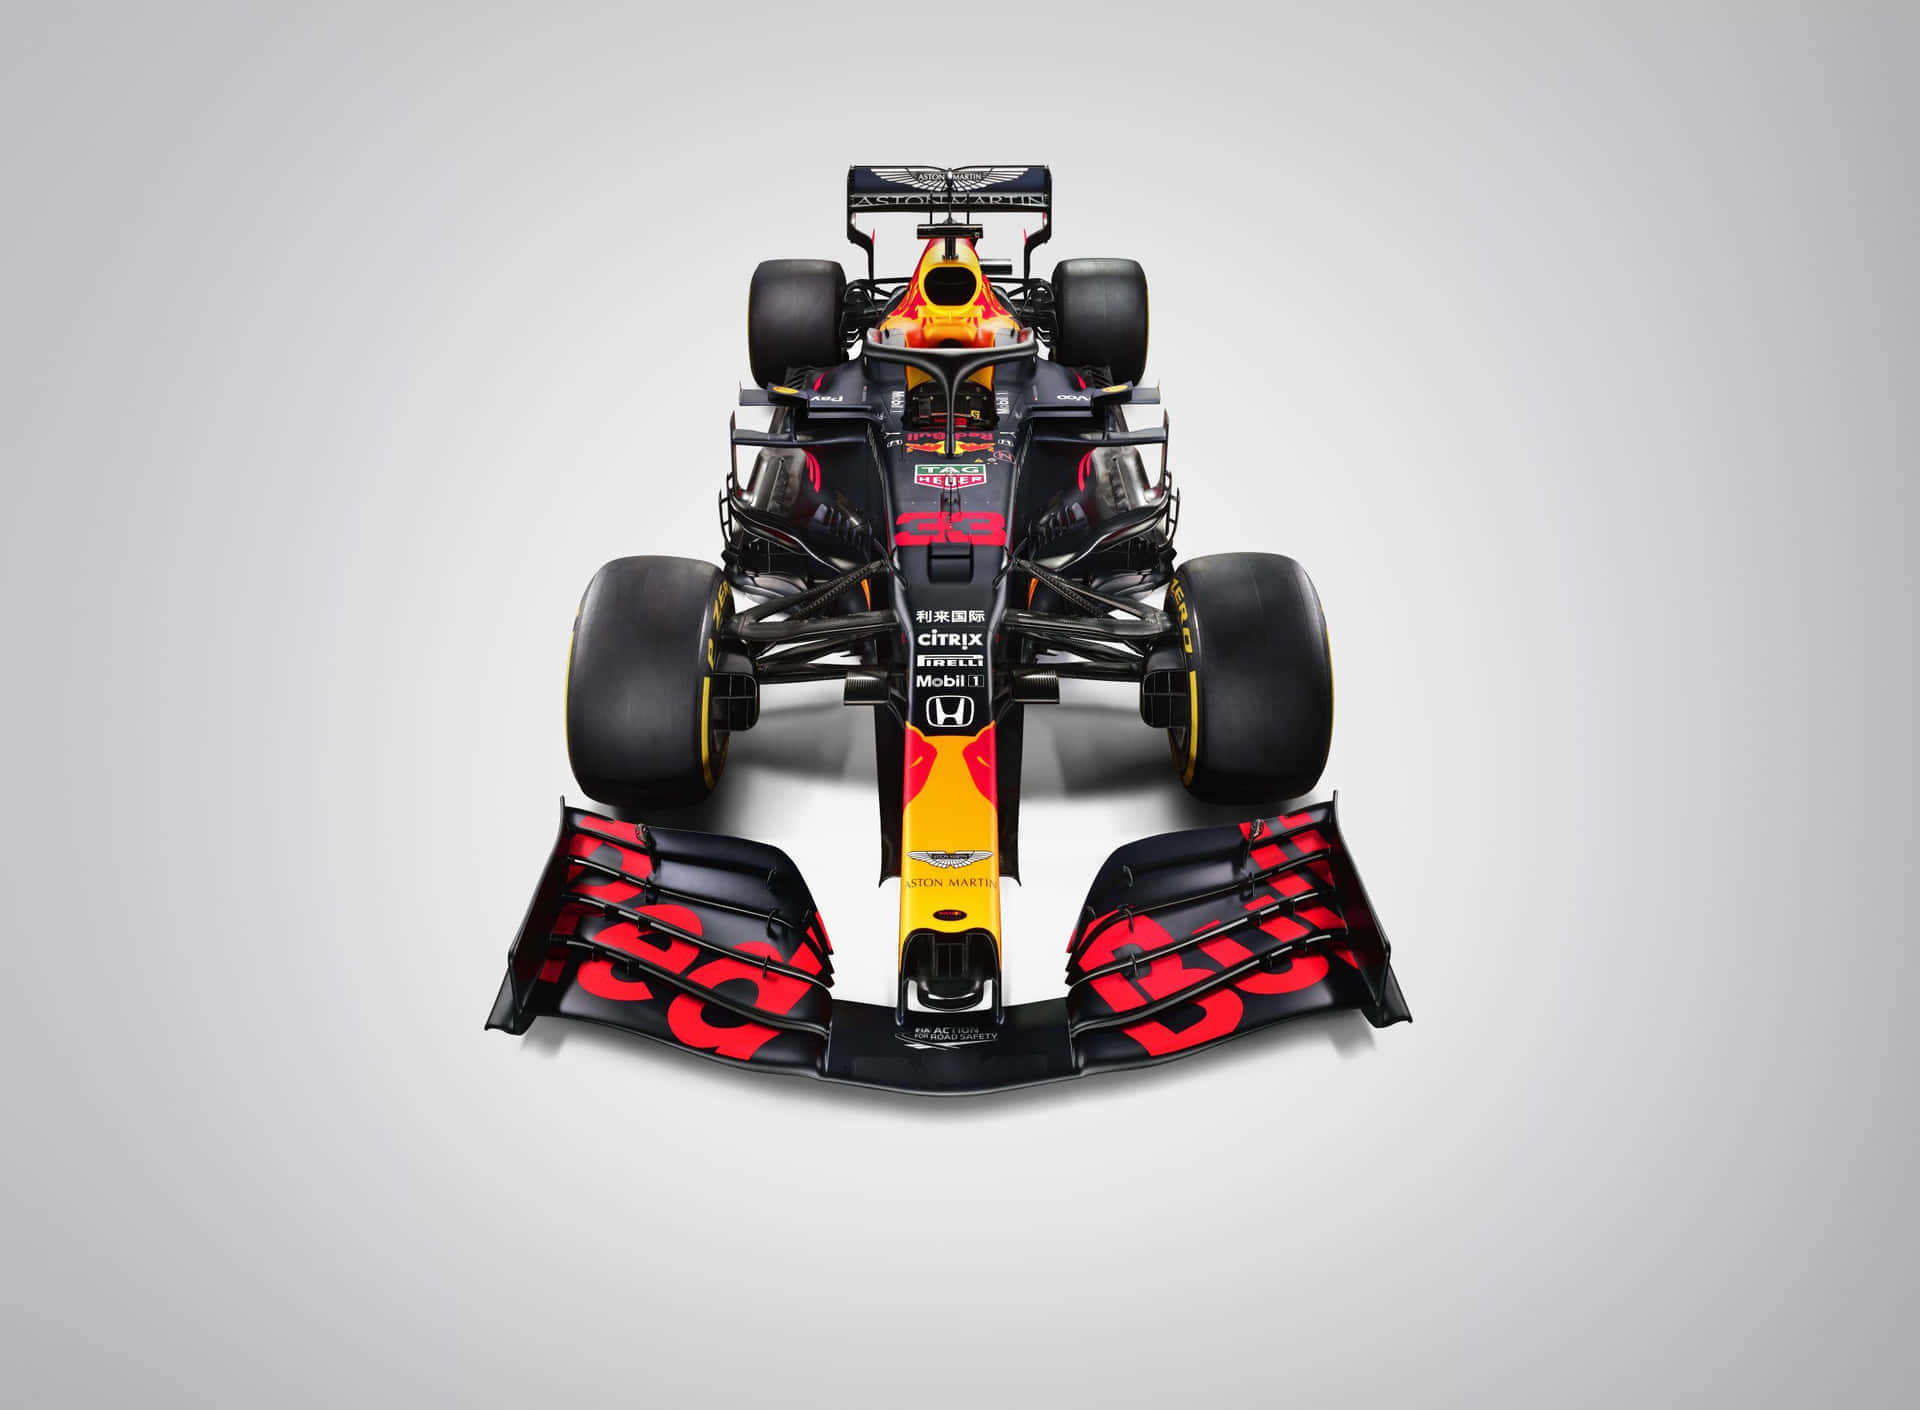 Max Verstappen racing on track in his Red Bull car